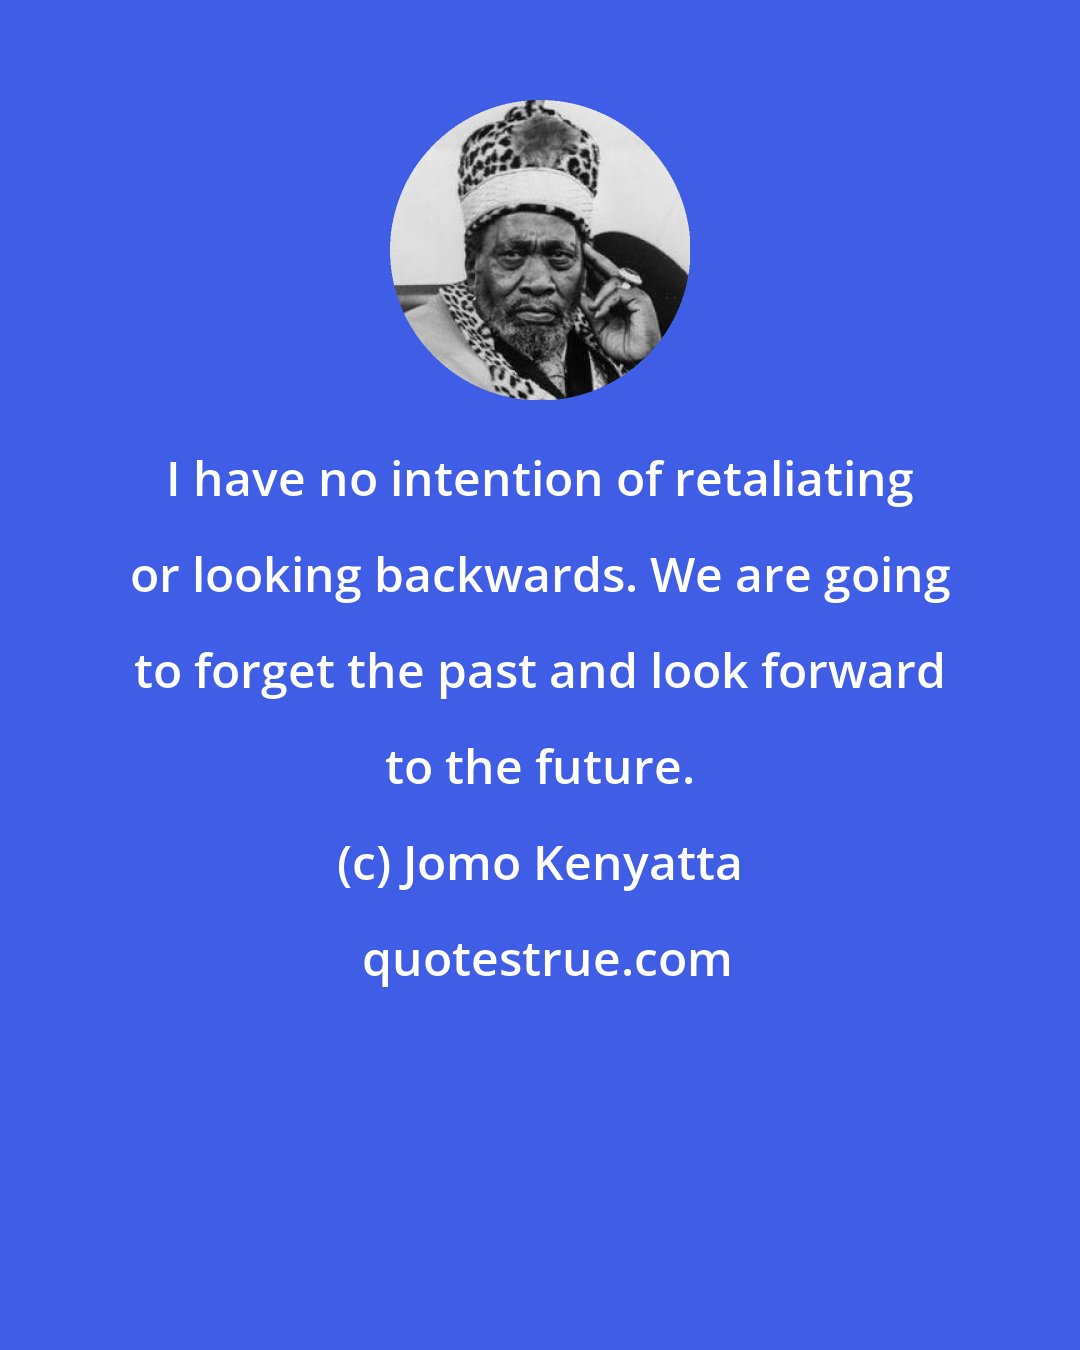 Jomo Kenyatta: I have no intention of retaliating or looking backwards. We are going to forget the past and look forward to the future.